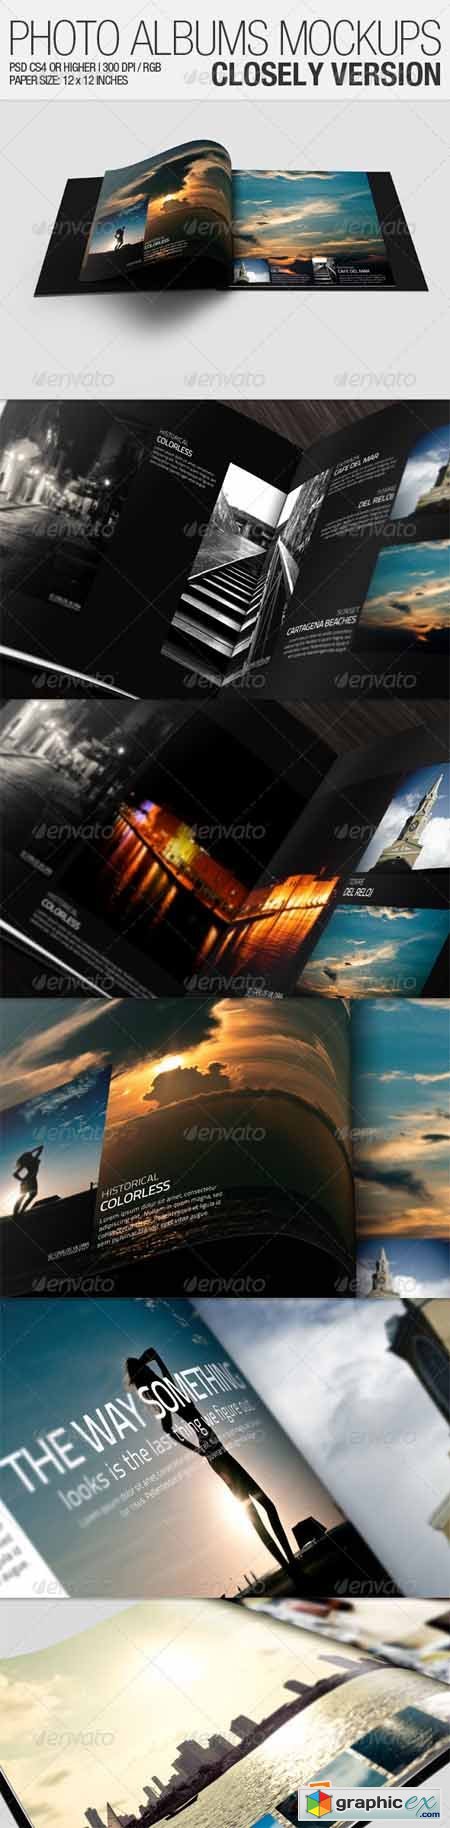 Photo Albums Mockups - Closely Version 981690